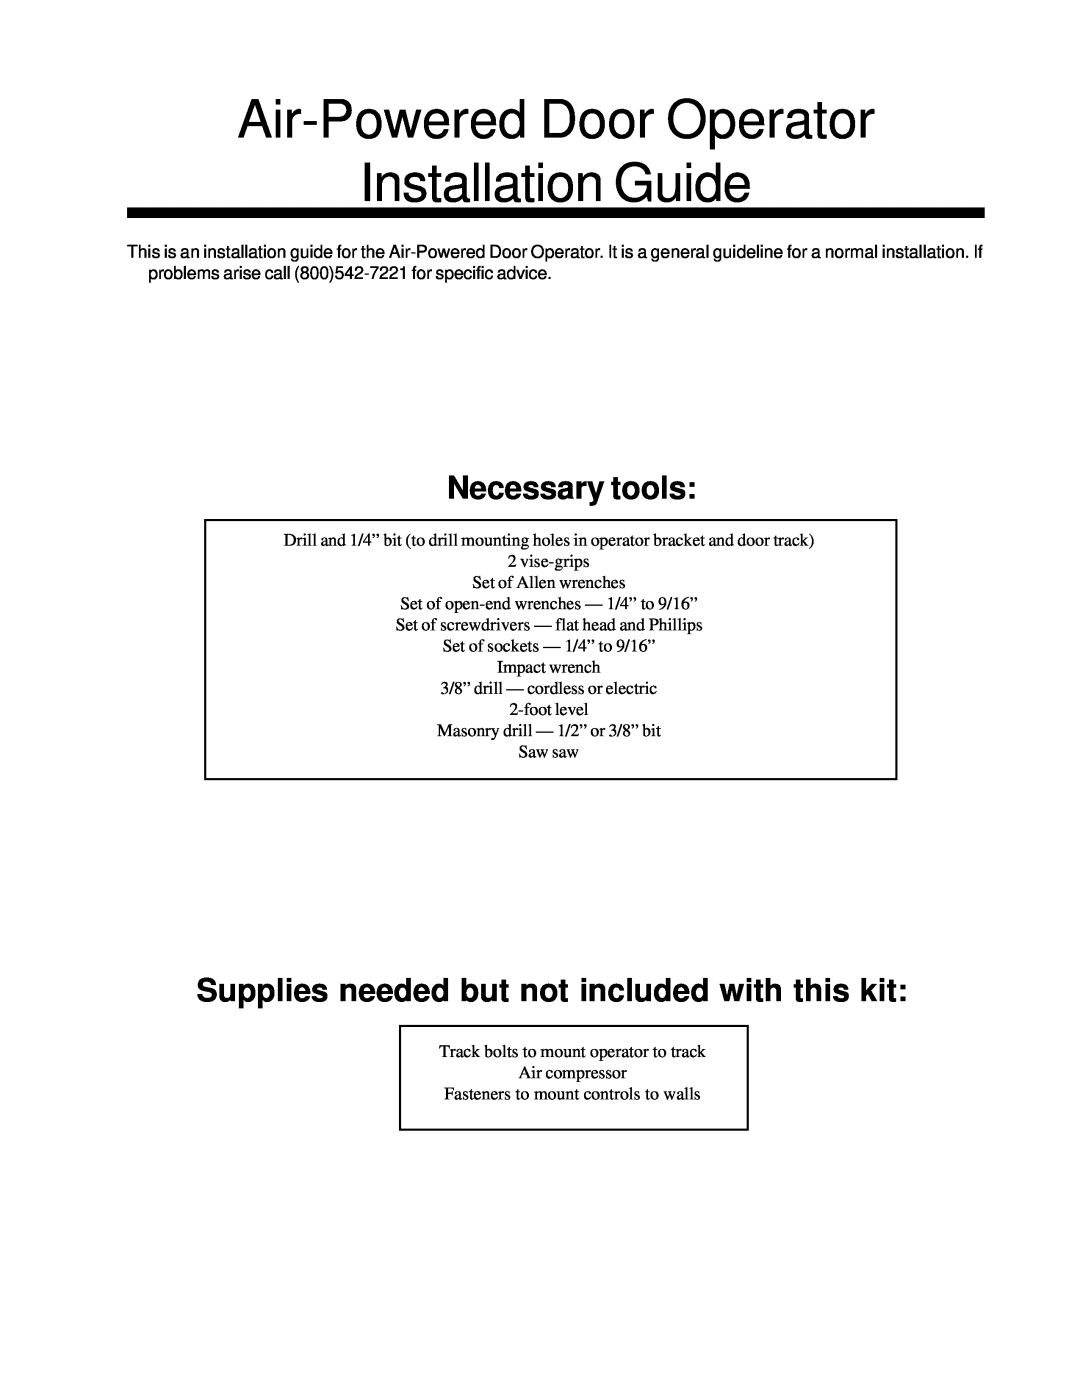 Ultimate Products UP-206 manual Air-PoweredDoor Operator Installation Guide, Necessary tools 